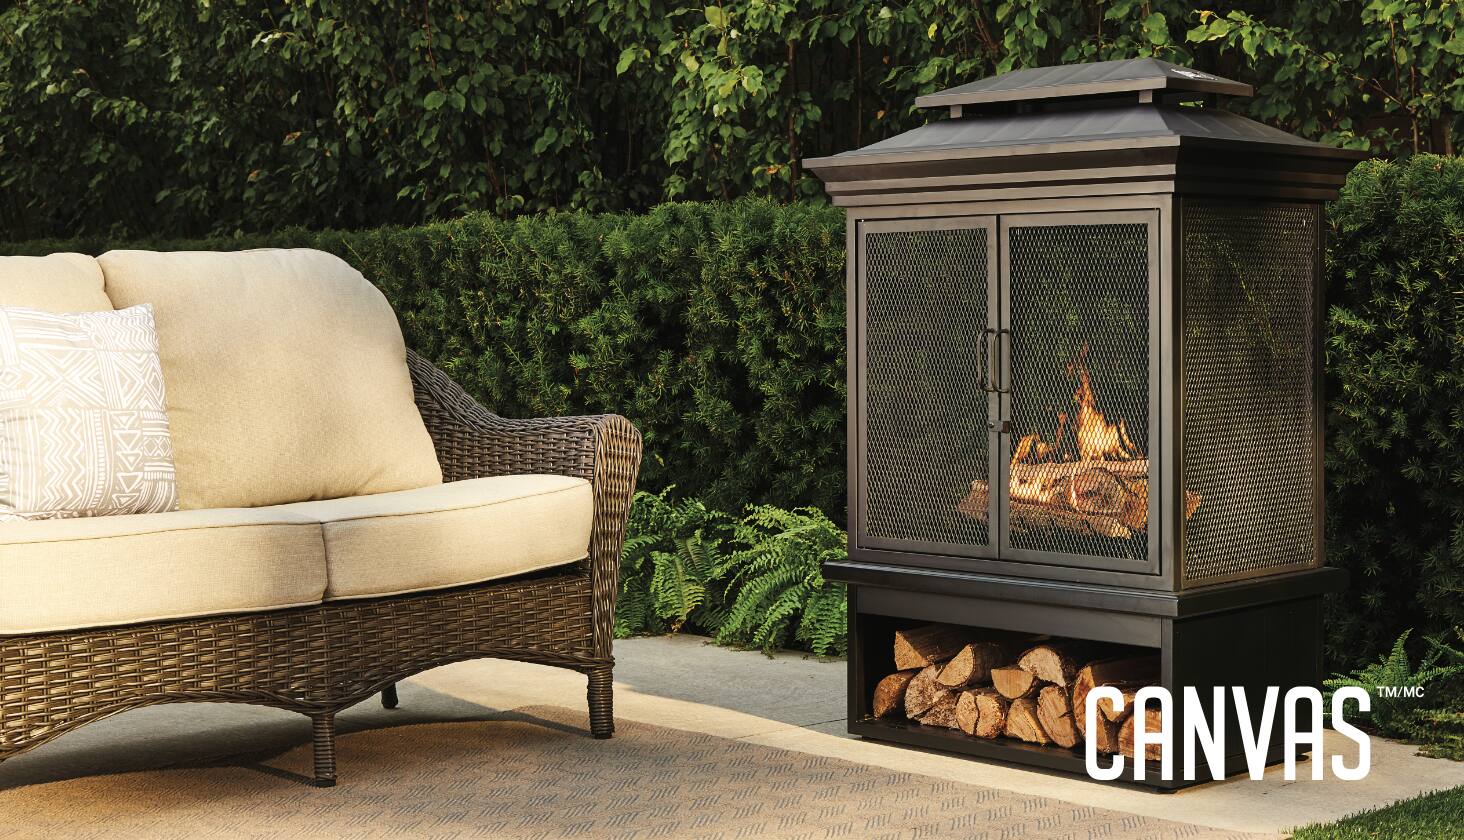 Add warmth and style to your patio with this sleek, wood-burning fireplace that includes mesh walls for protection, ash tray lift and accessories.